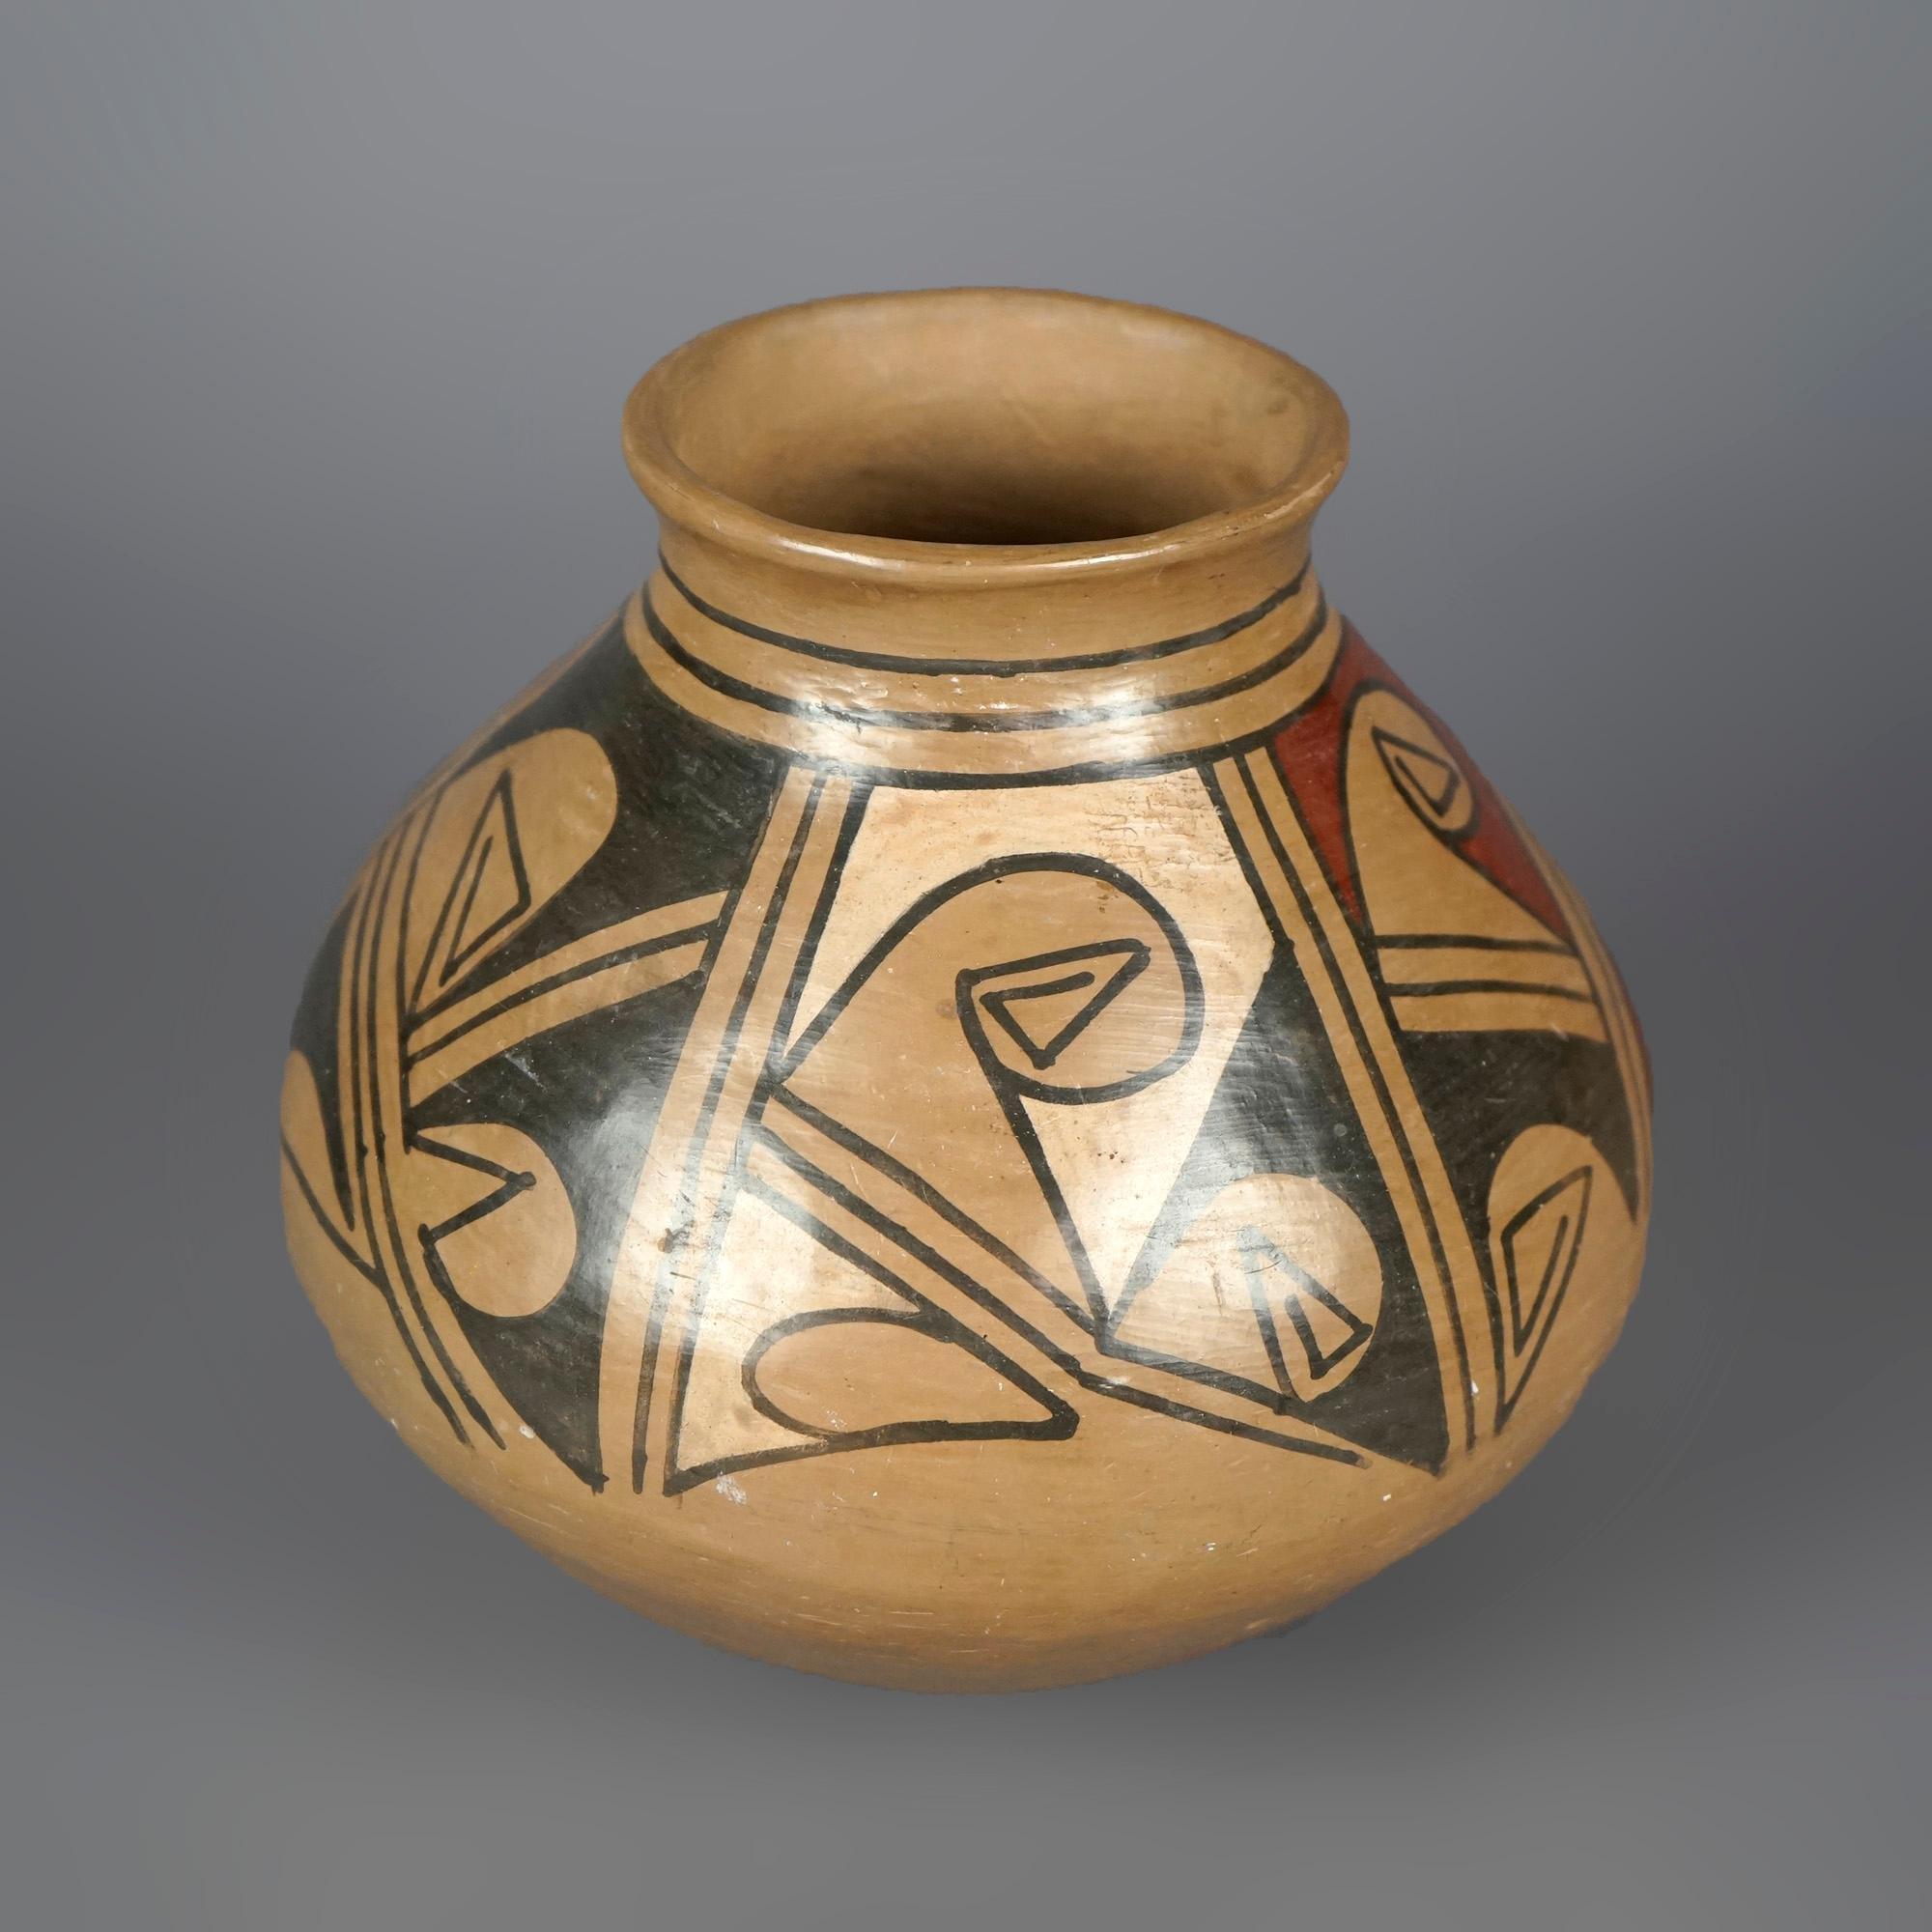 An antique Southwestern Navajo pottery vase offers earthenware construction with stylized geometric elements, unsigned, c1930

Measures- 7.25'' H x 7.5'' W x 7.5'' D.